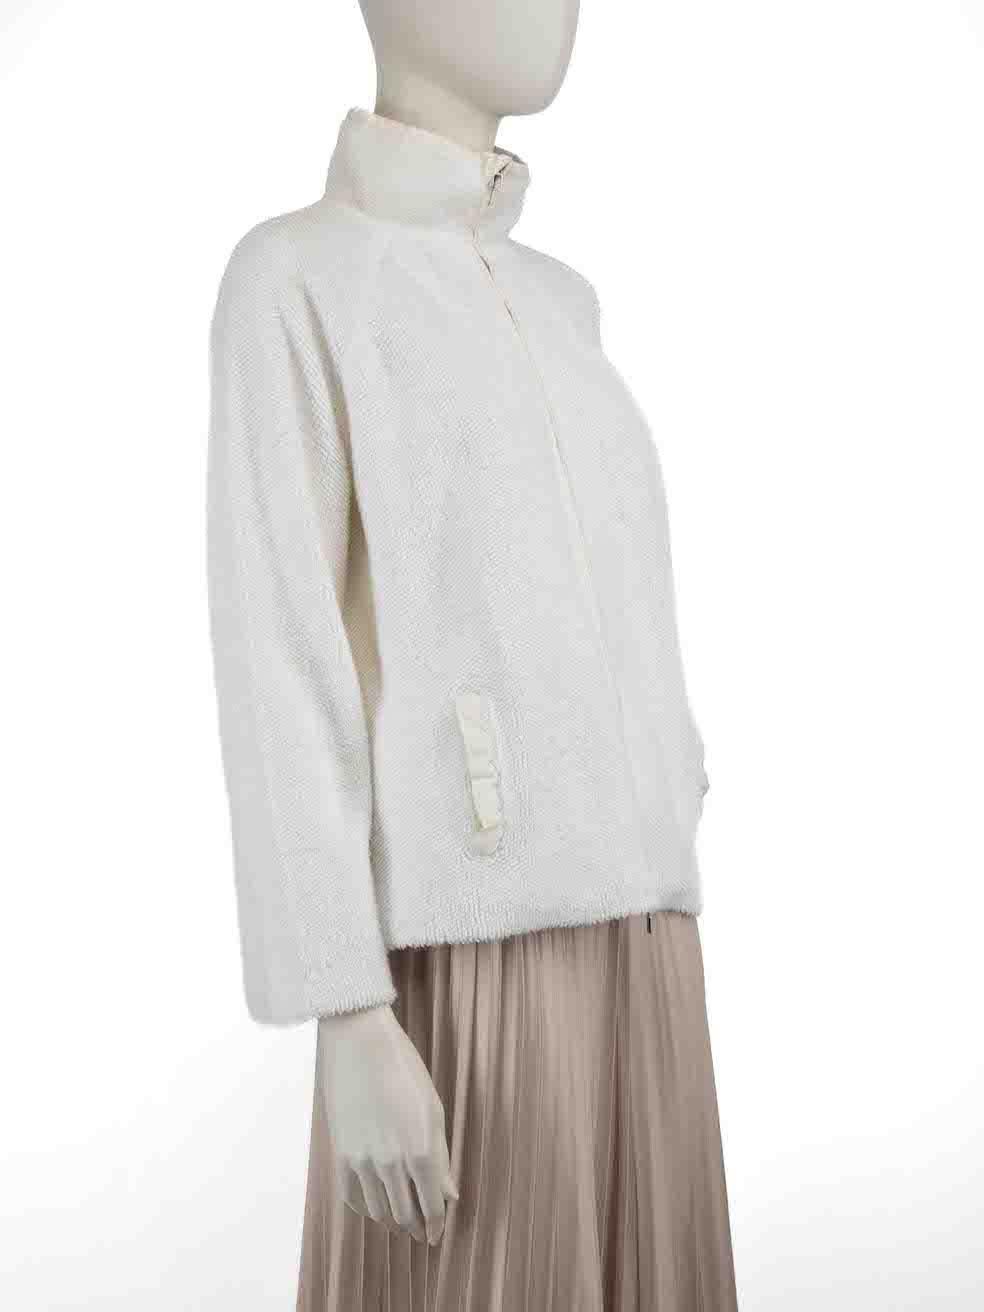 CONDITION is Very good. Minimal wear to jacket is evident. There are some very faint marks to the weave on this used Malo designer resale item.
 
 
 
 Details
 
 
 White
 
 Cotton
 
 Jacket
 
 Zip fastening
 
 Mock neck
 
 2x Side pockets
 
 Looped